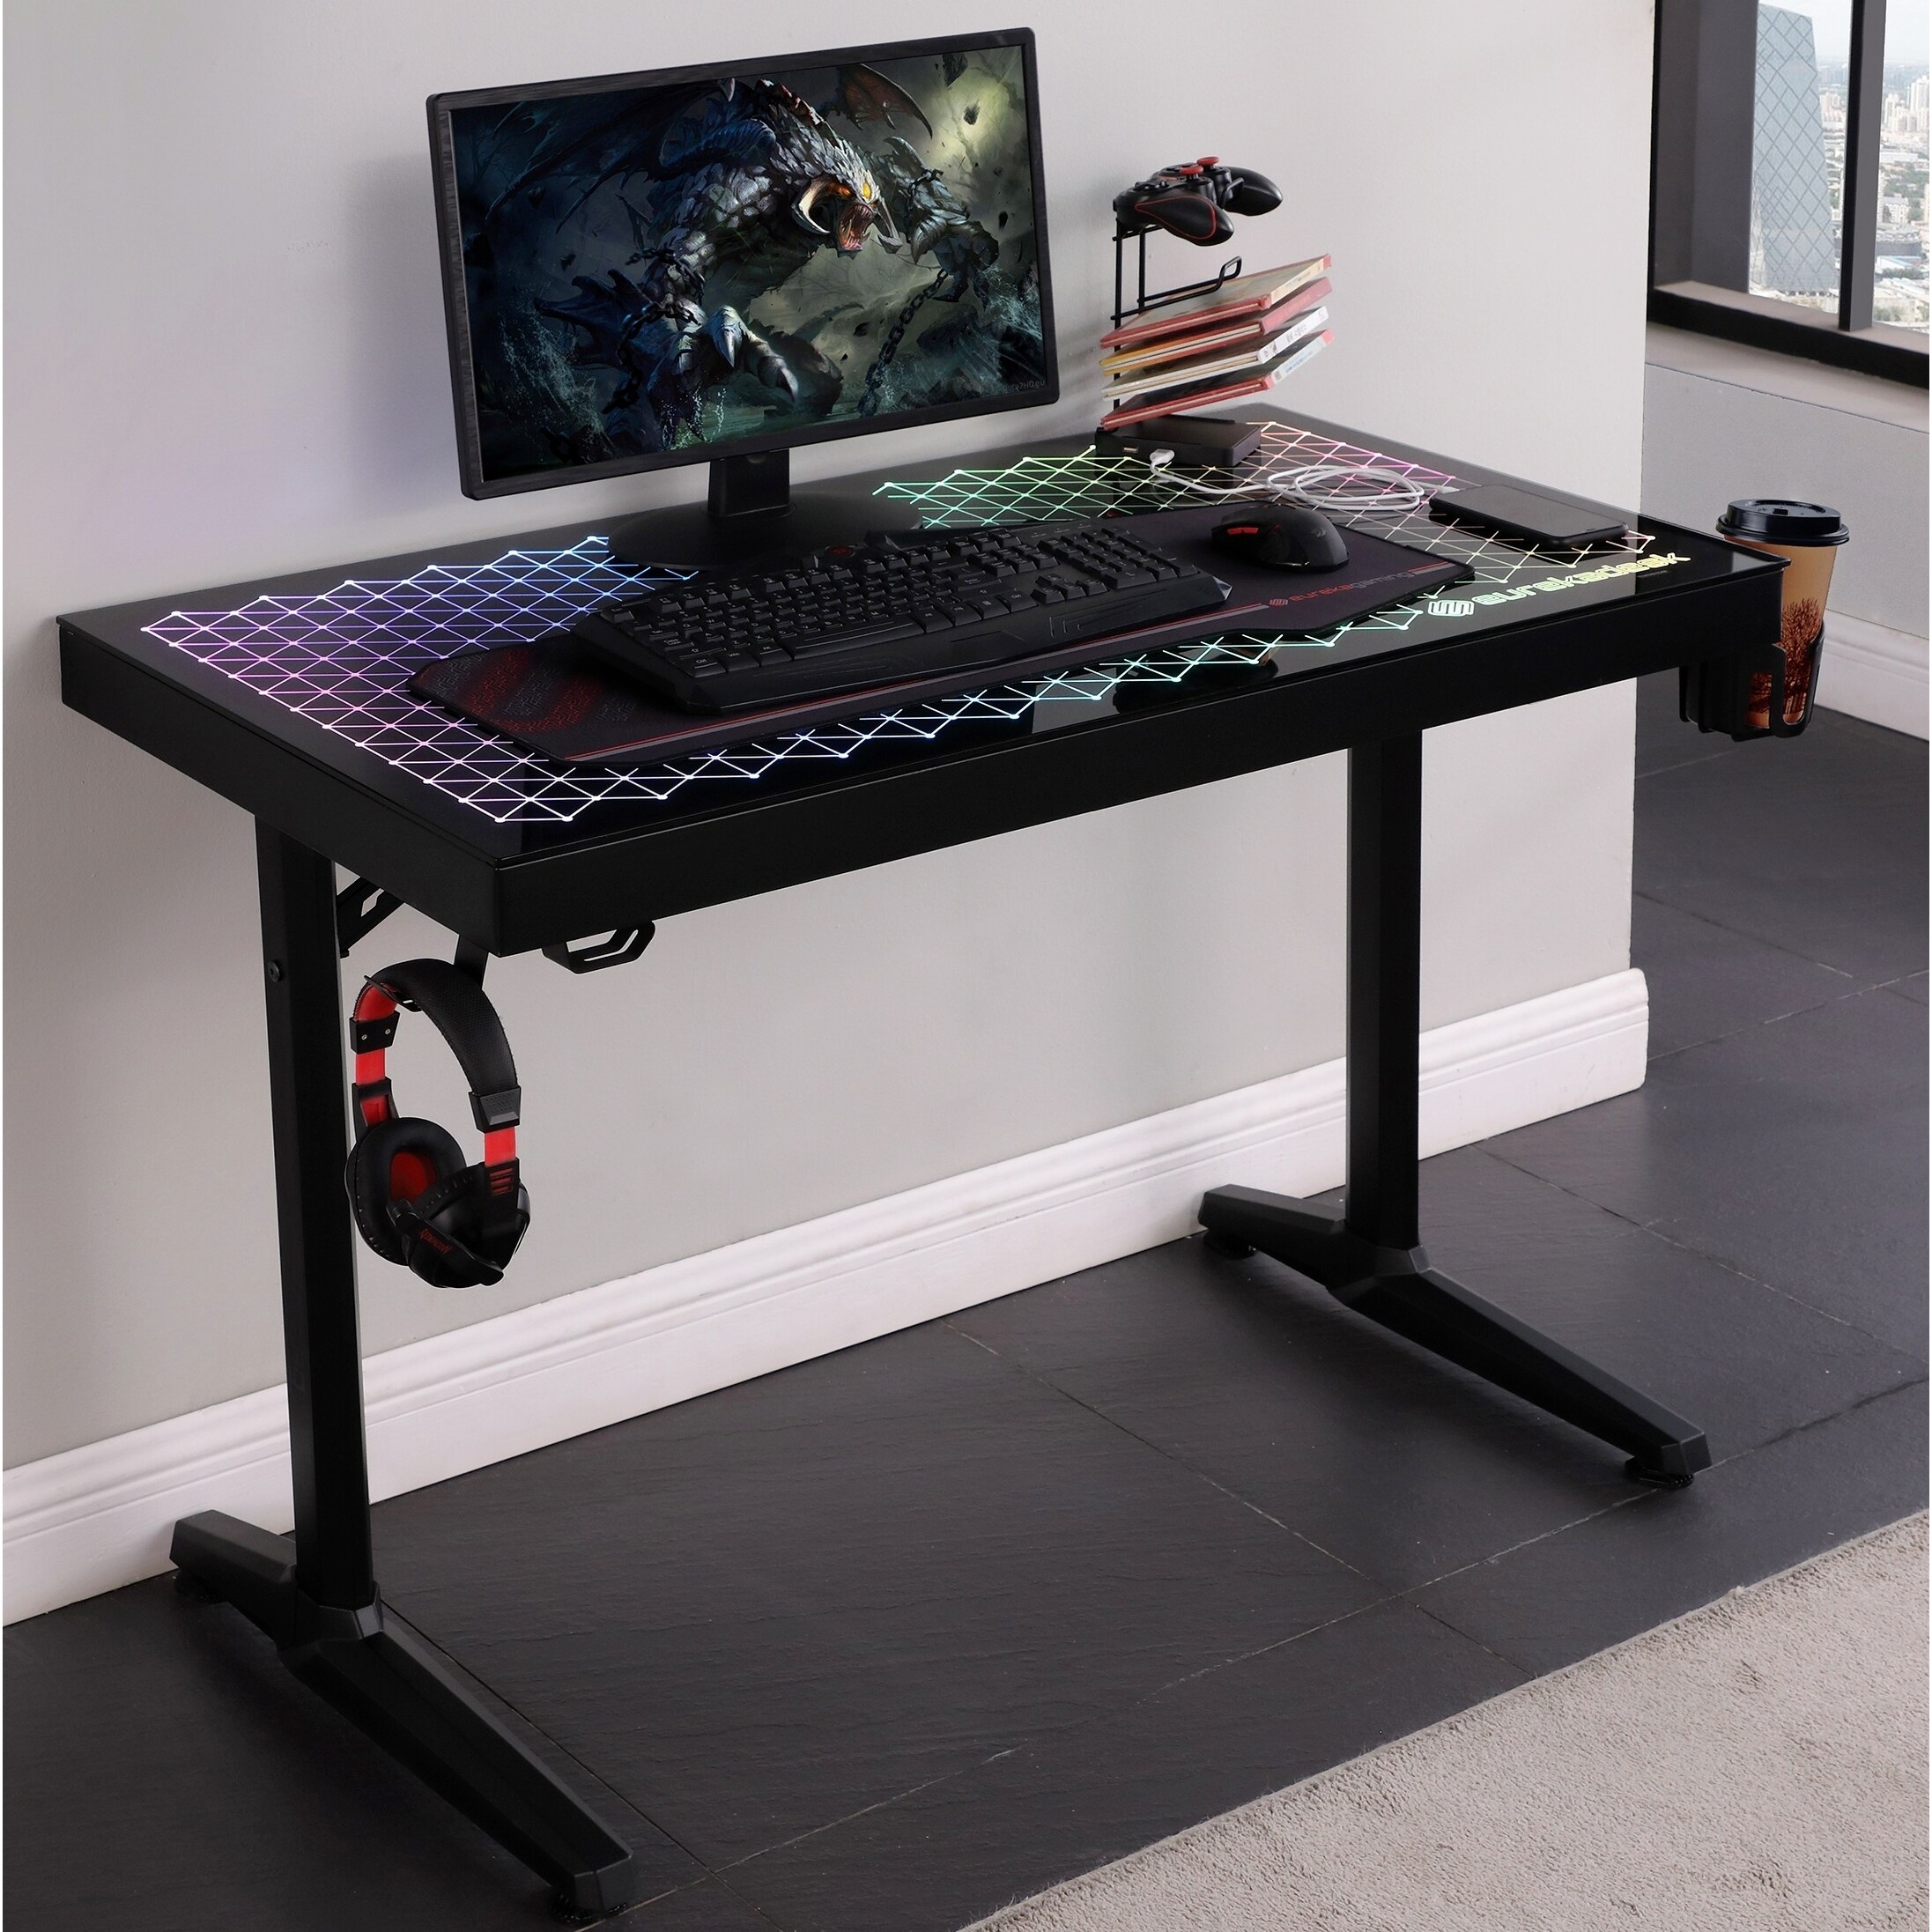 https://ak1.ostkcdn.com/images/products/is/images/direct/b35e3032b93f9e9ae1240b2ac993a4771d0727b3/Professional-Ergonomic-Tempered-Glass-Top-Gaming-Desk-with-LED-Lighting.jpg